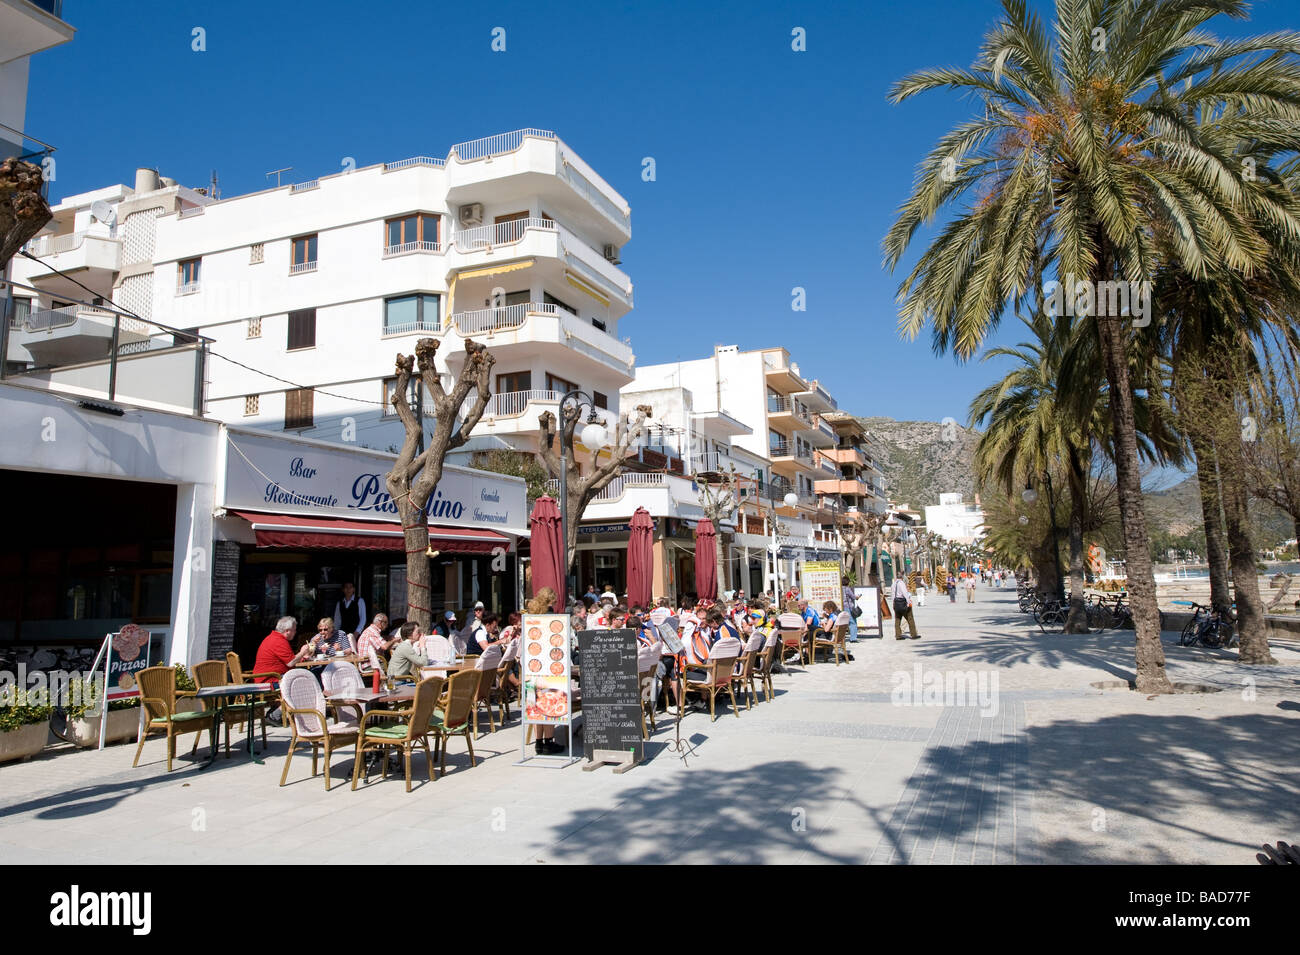 People sitting and eating al fresco outside a restaurant in Puerto Pollensa Mallorca Spain Stock Photo